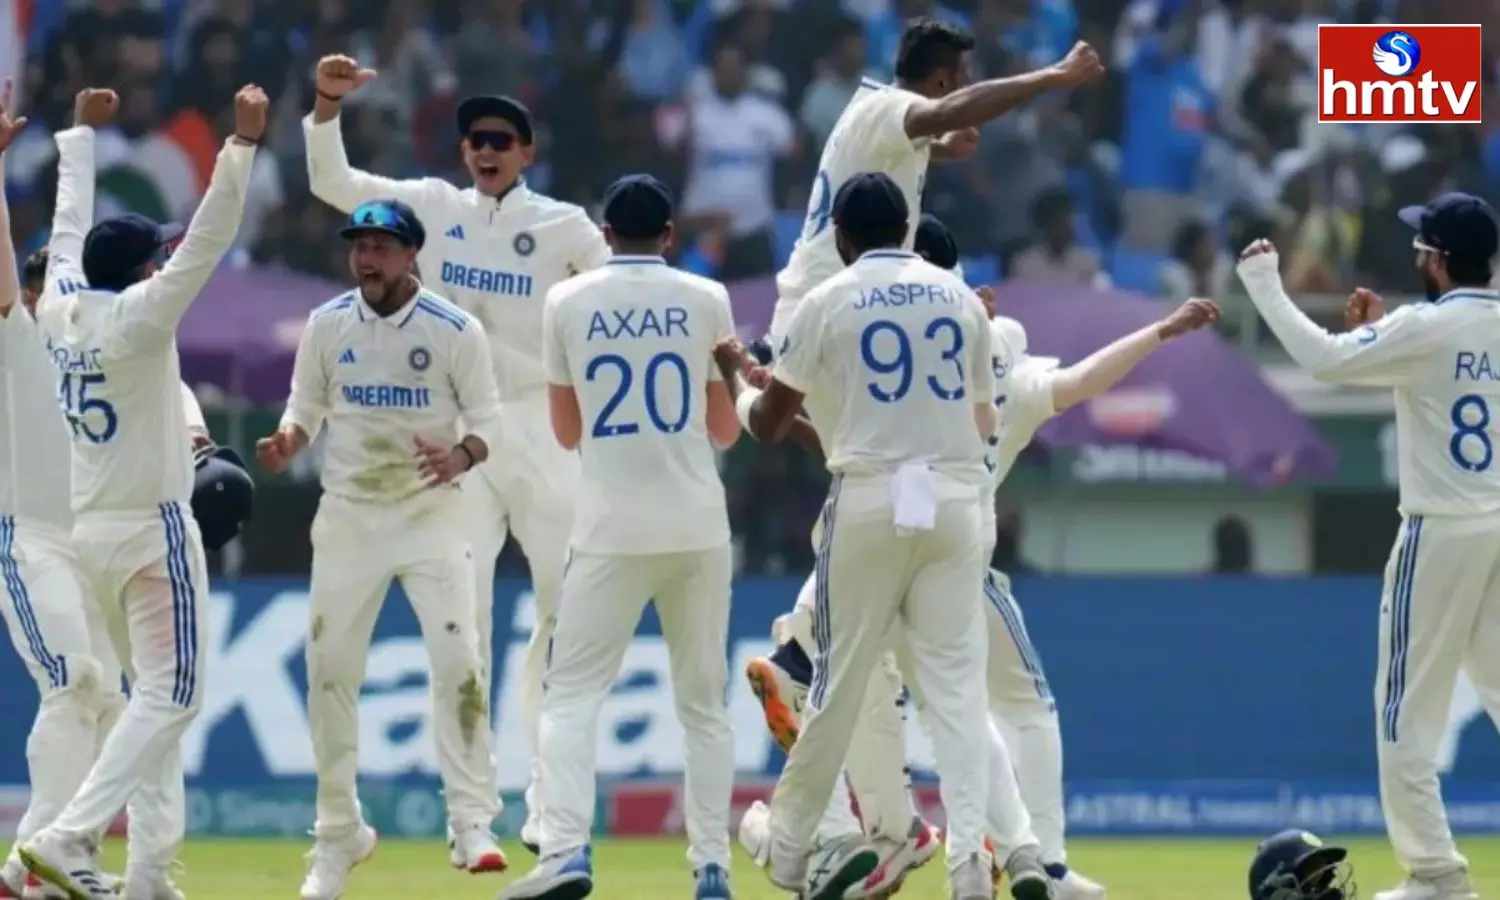 IND Beat ENG by 106 runs to level the series 1-1 in Visakhapatnam